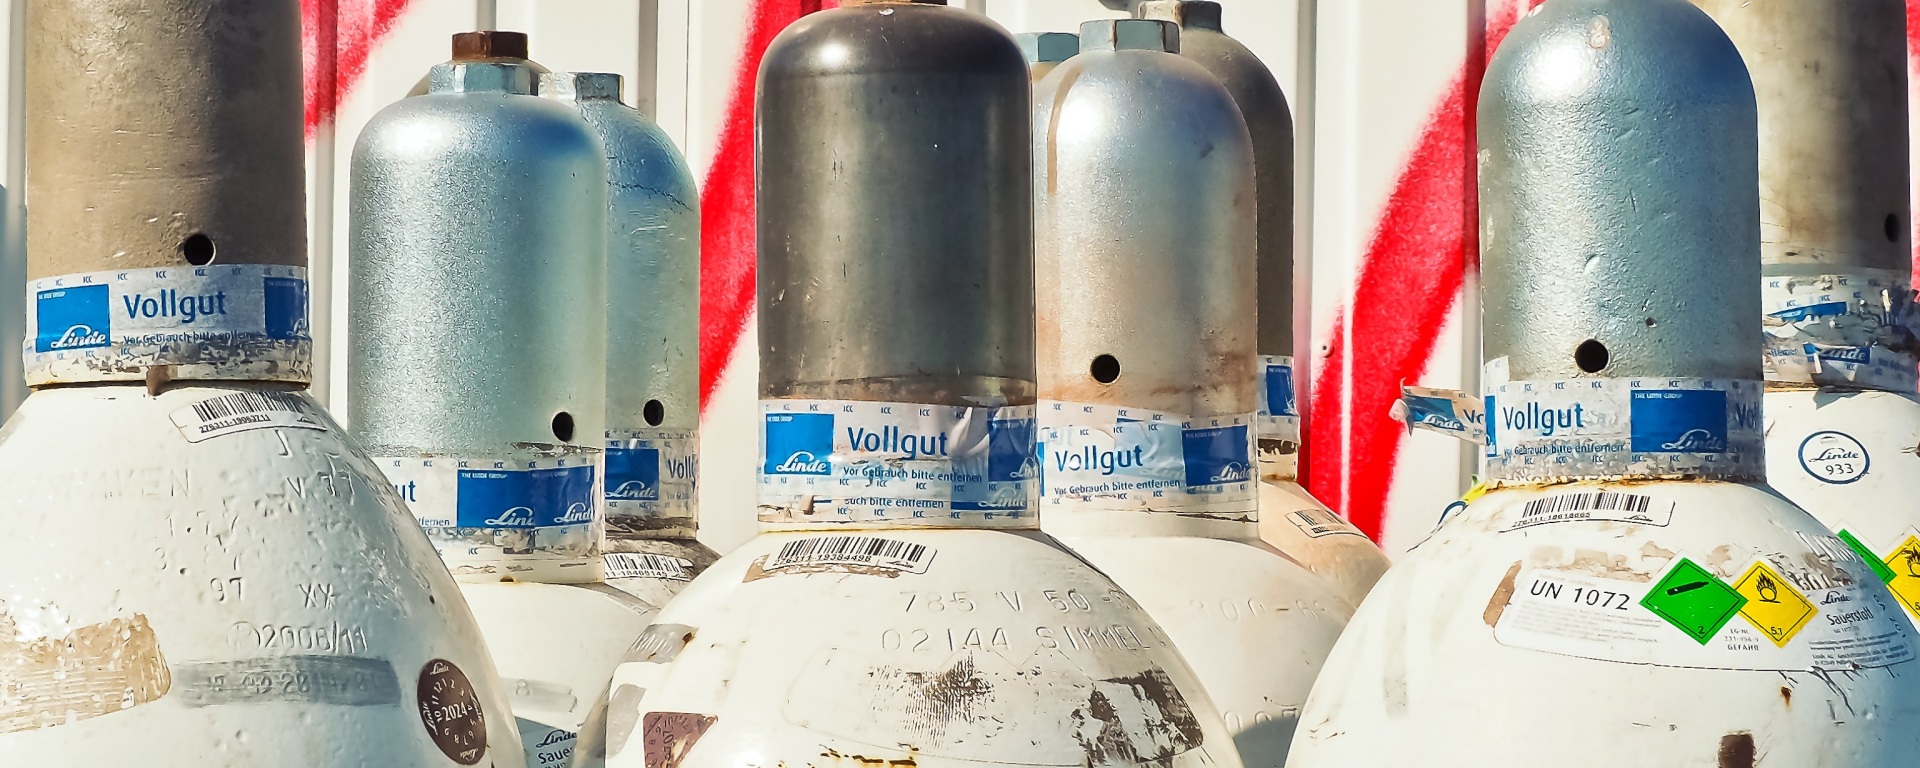 Compressed gas is dangerous in and of itself